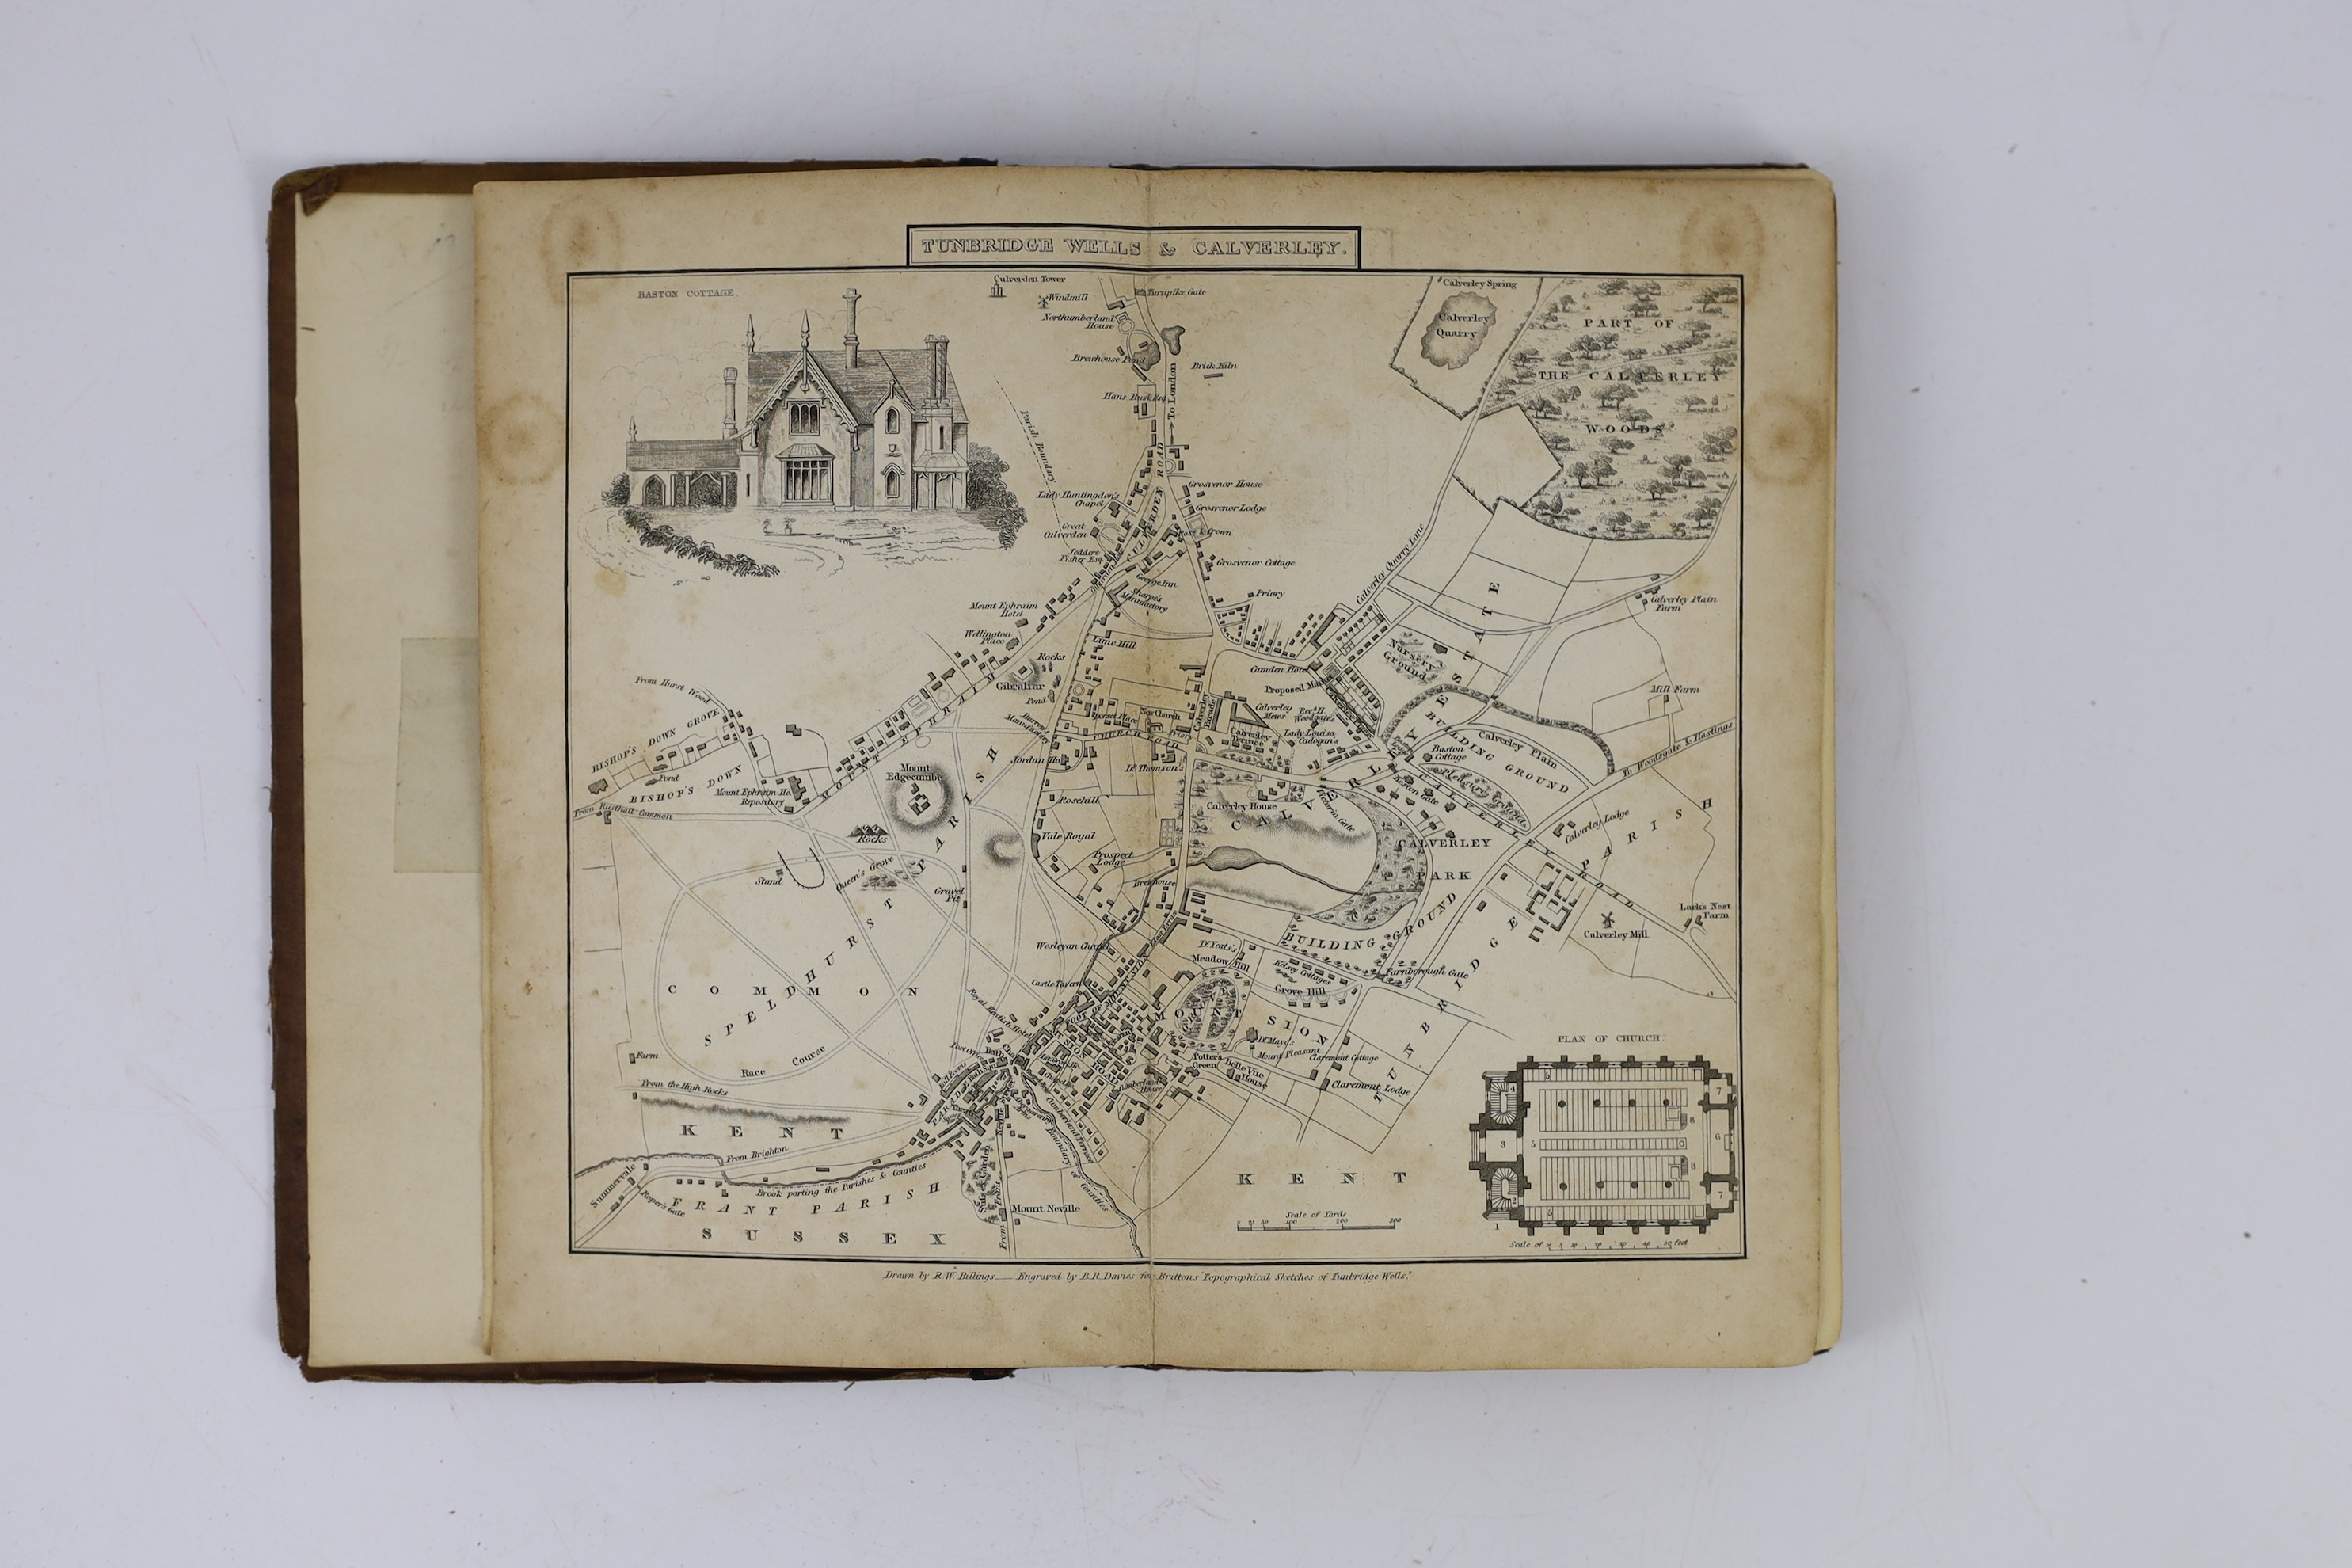 KENT, TUNBRIDGE WELLS: Britton, John - Descriptive Sketches of Tunbridge Wells and the Calverley Estate... 2 d-page lithographed plans, 10 lithographed plates and text engravings; original cloth and paper label (rebacked